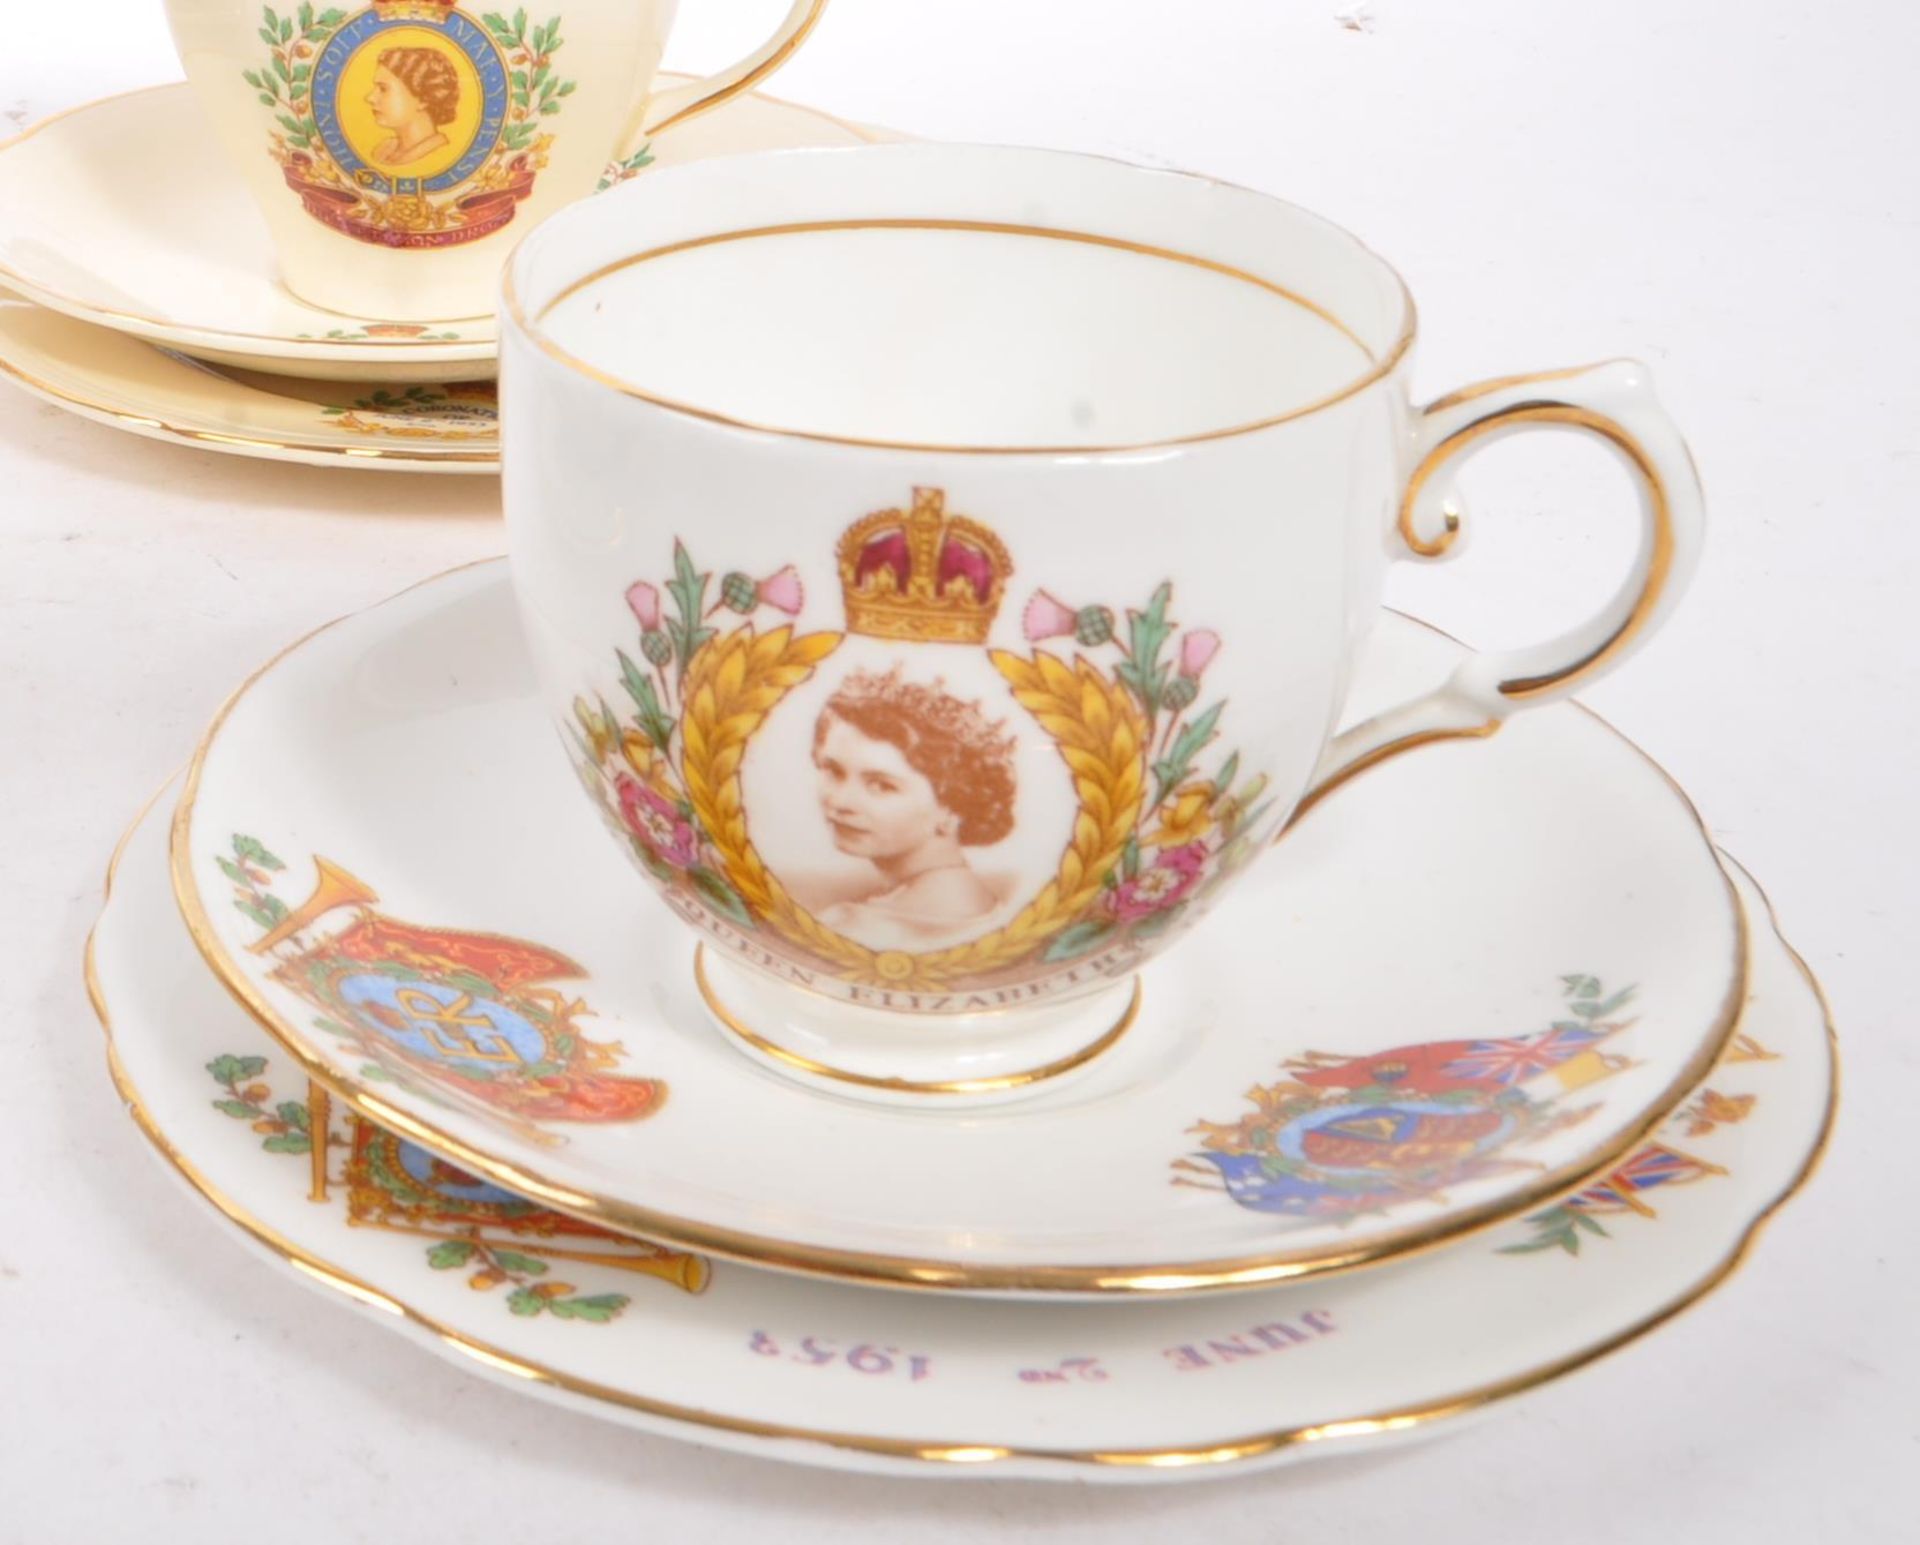 COLLECTION OF QUEEN ELIZABETH II CORONATION CHINA ITEMS - Image 5 of 6